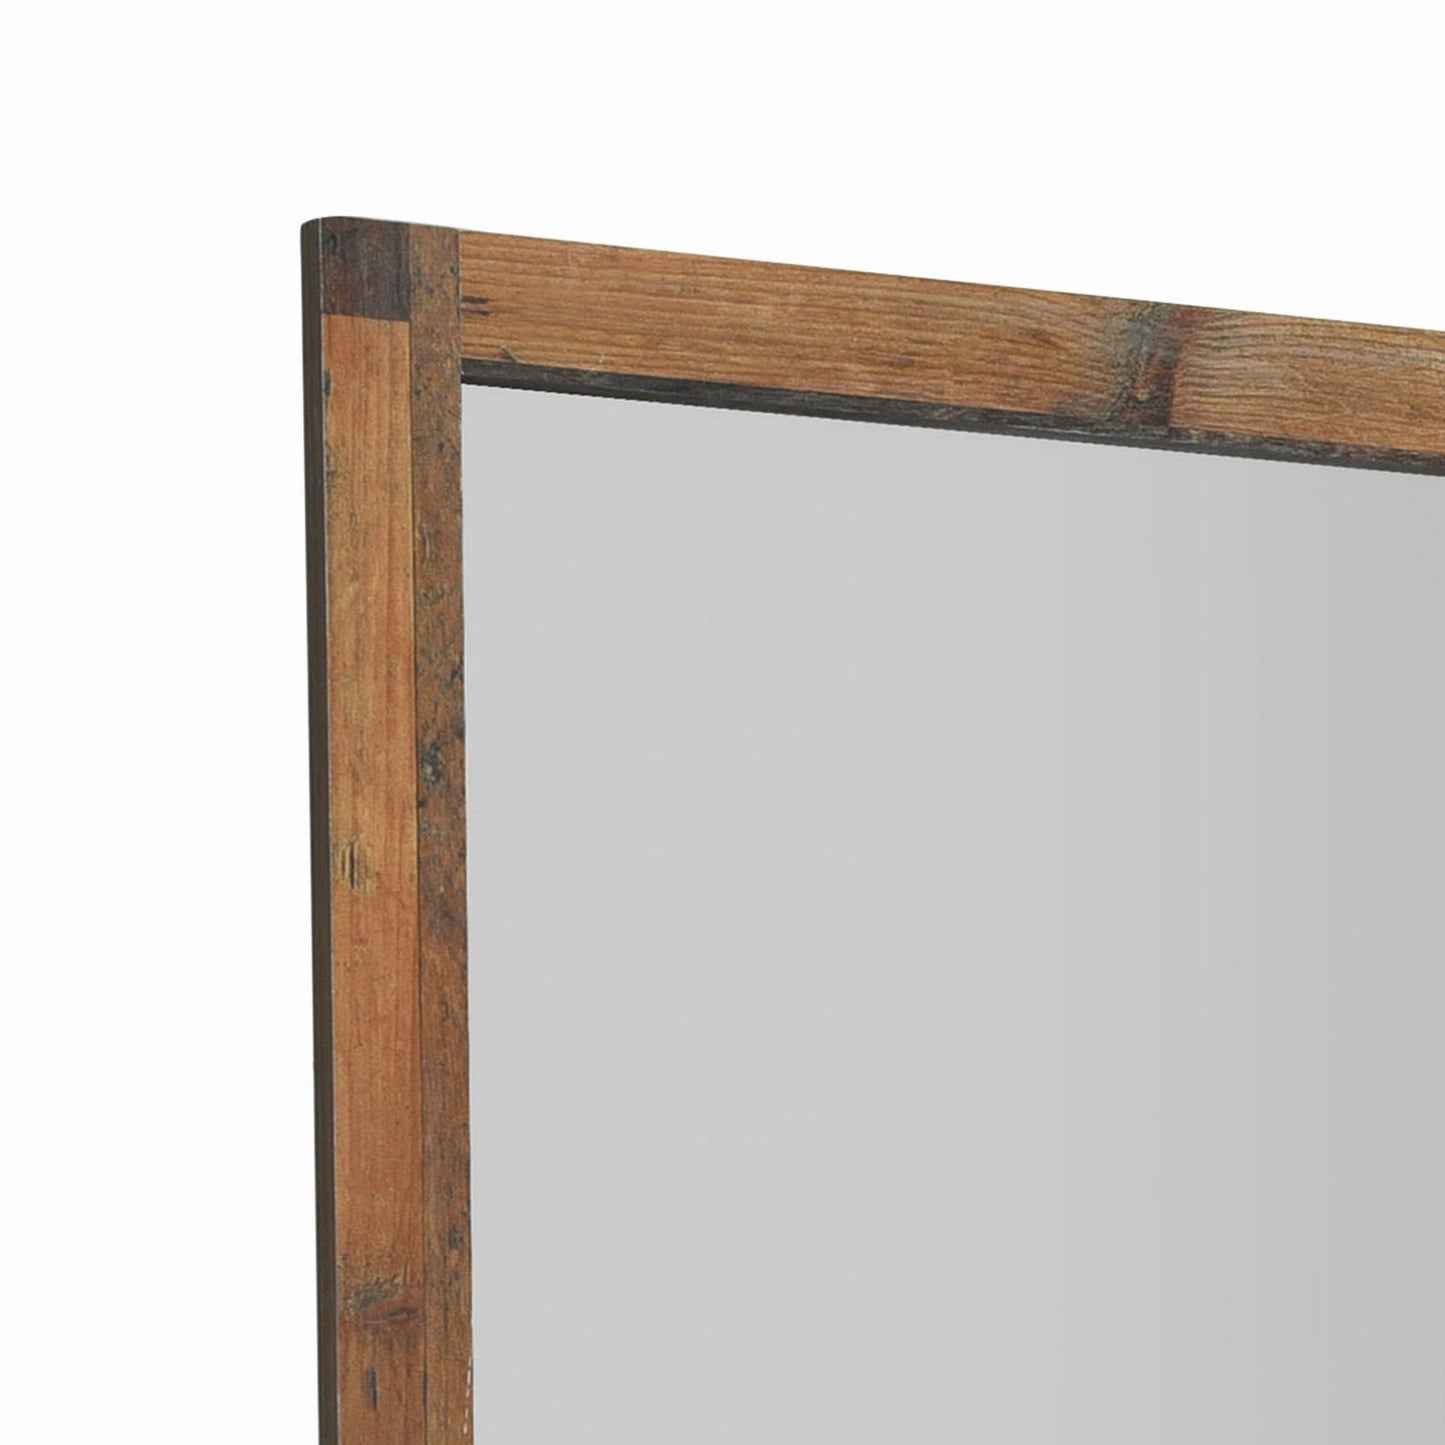 Benzara 39" Square Rustic Brown Wooden Framed Wall Mirror